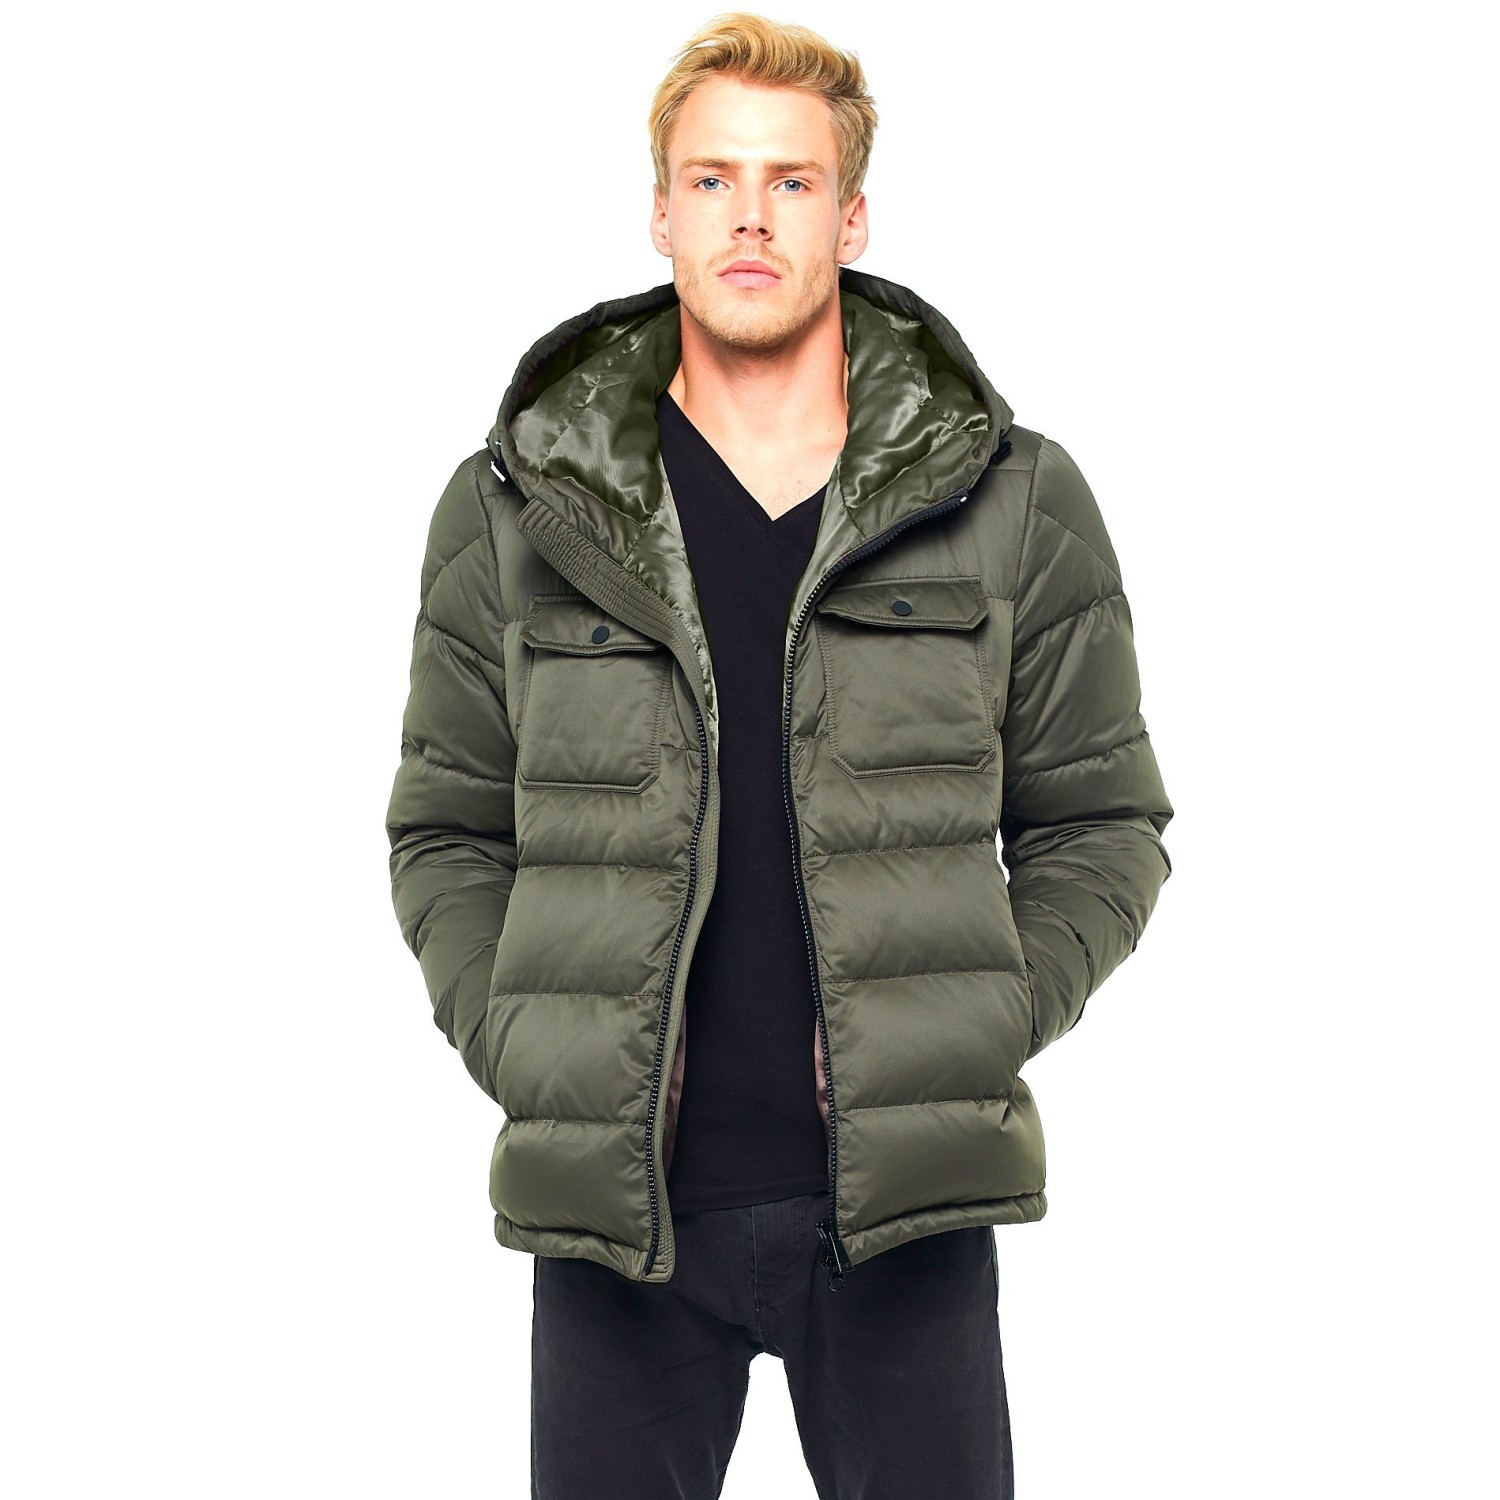 LEOCLOTHO Mens Hoodie Cotton Padded Coat Winter Thicken Jacket Outerwear Fashion Faux Fur Collar